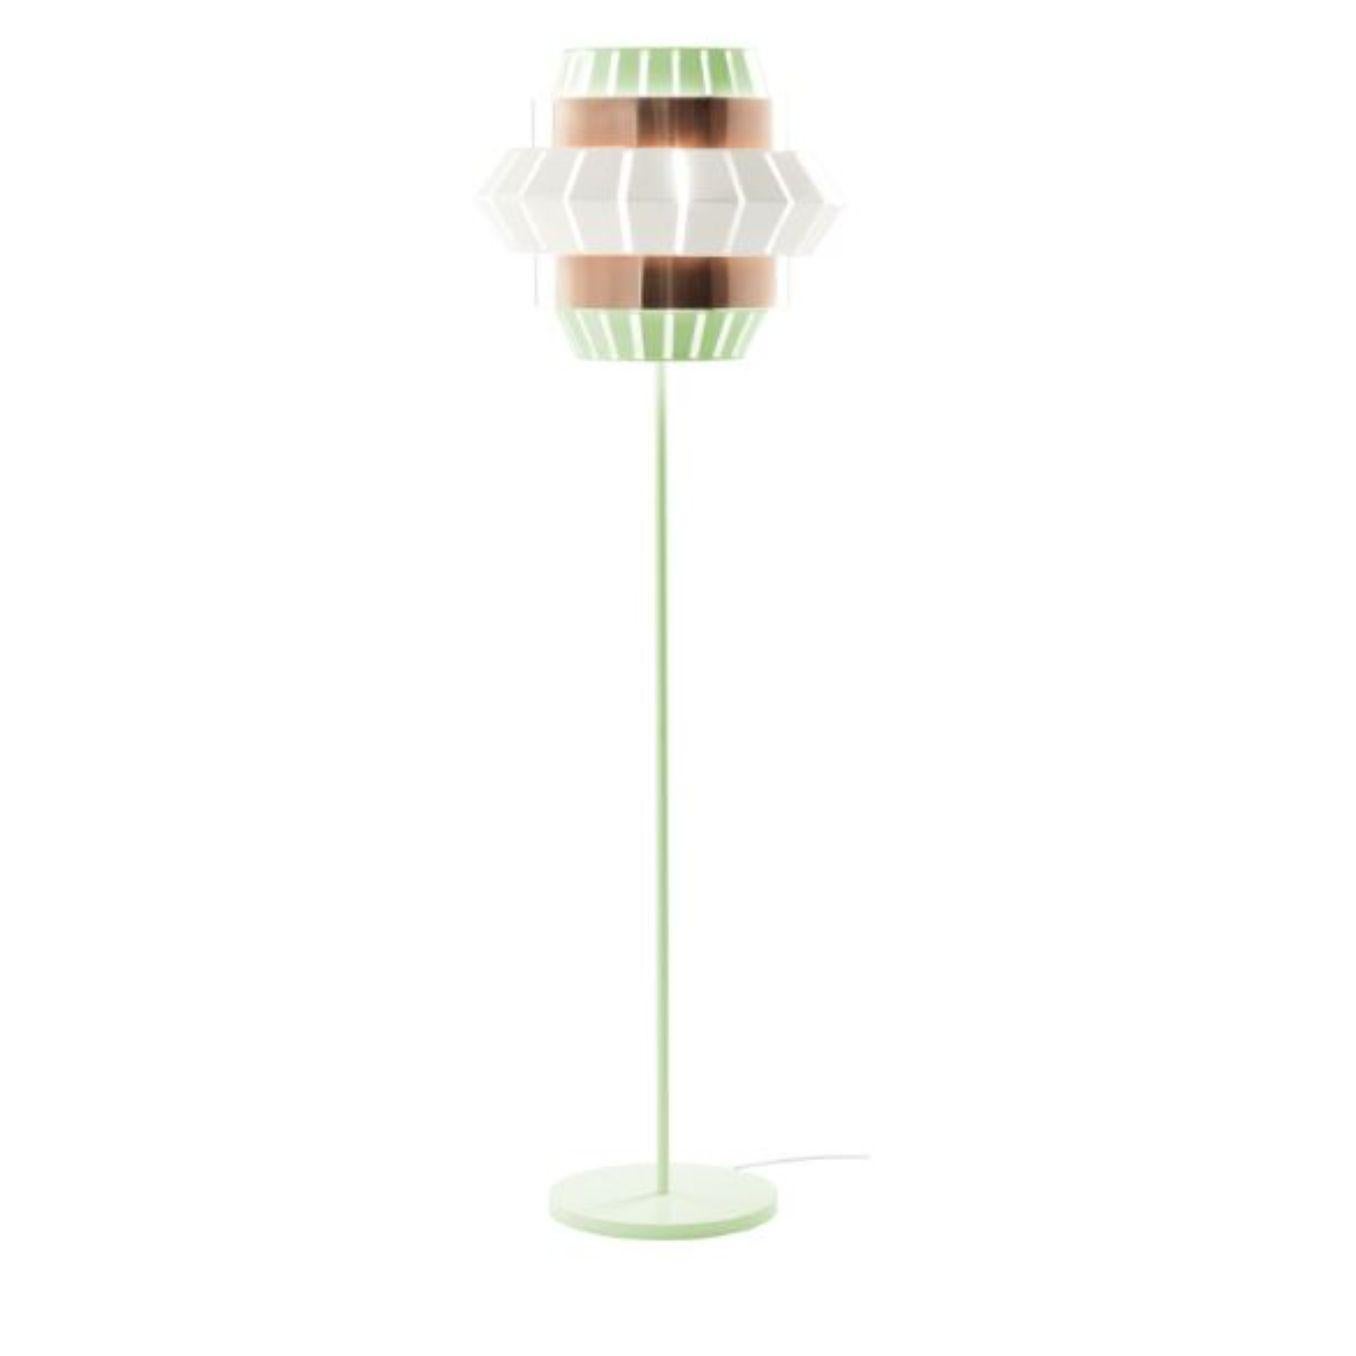 Dream and Ivory comb floor lamp with copper ring by Dooq
Dimensions: W 54 x D 54 x H 175 cm
Materials: lacquered metal, polished copper.
Also available in different colors and materials.

Information:
230V/50Hz
E27/1x20W LED
120V/60Hz
E26/1x15W